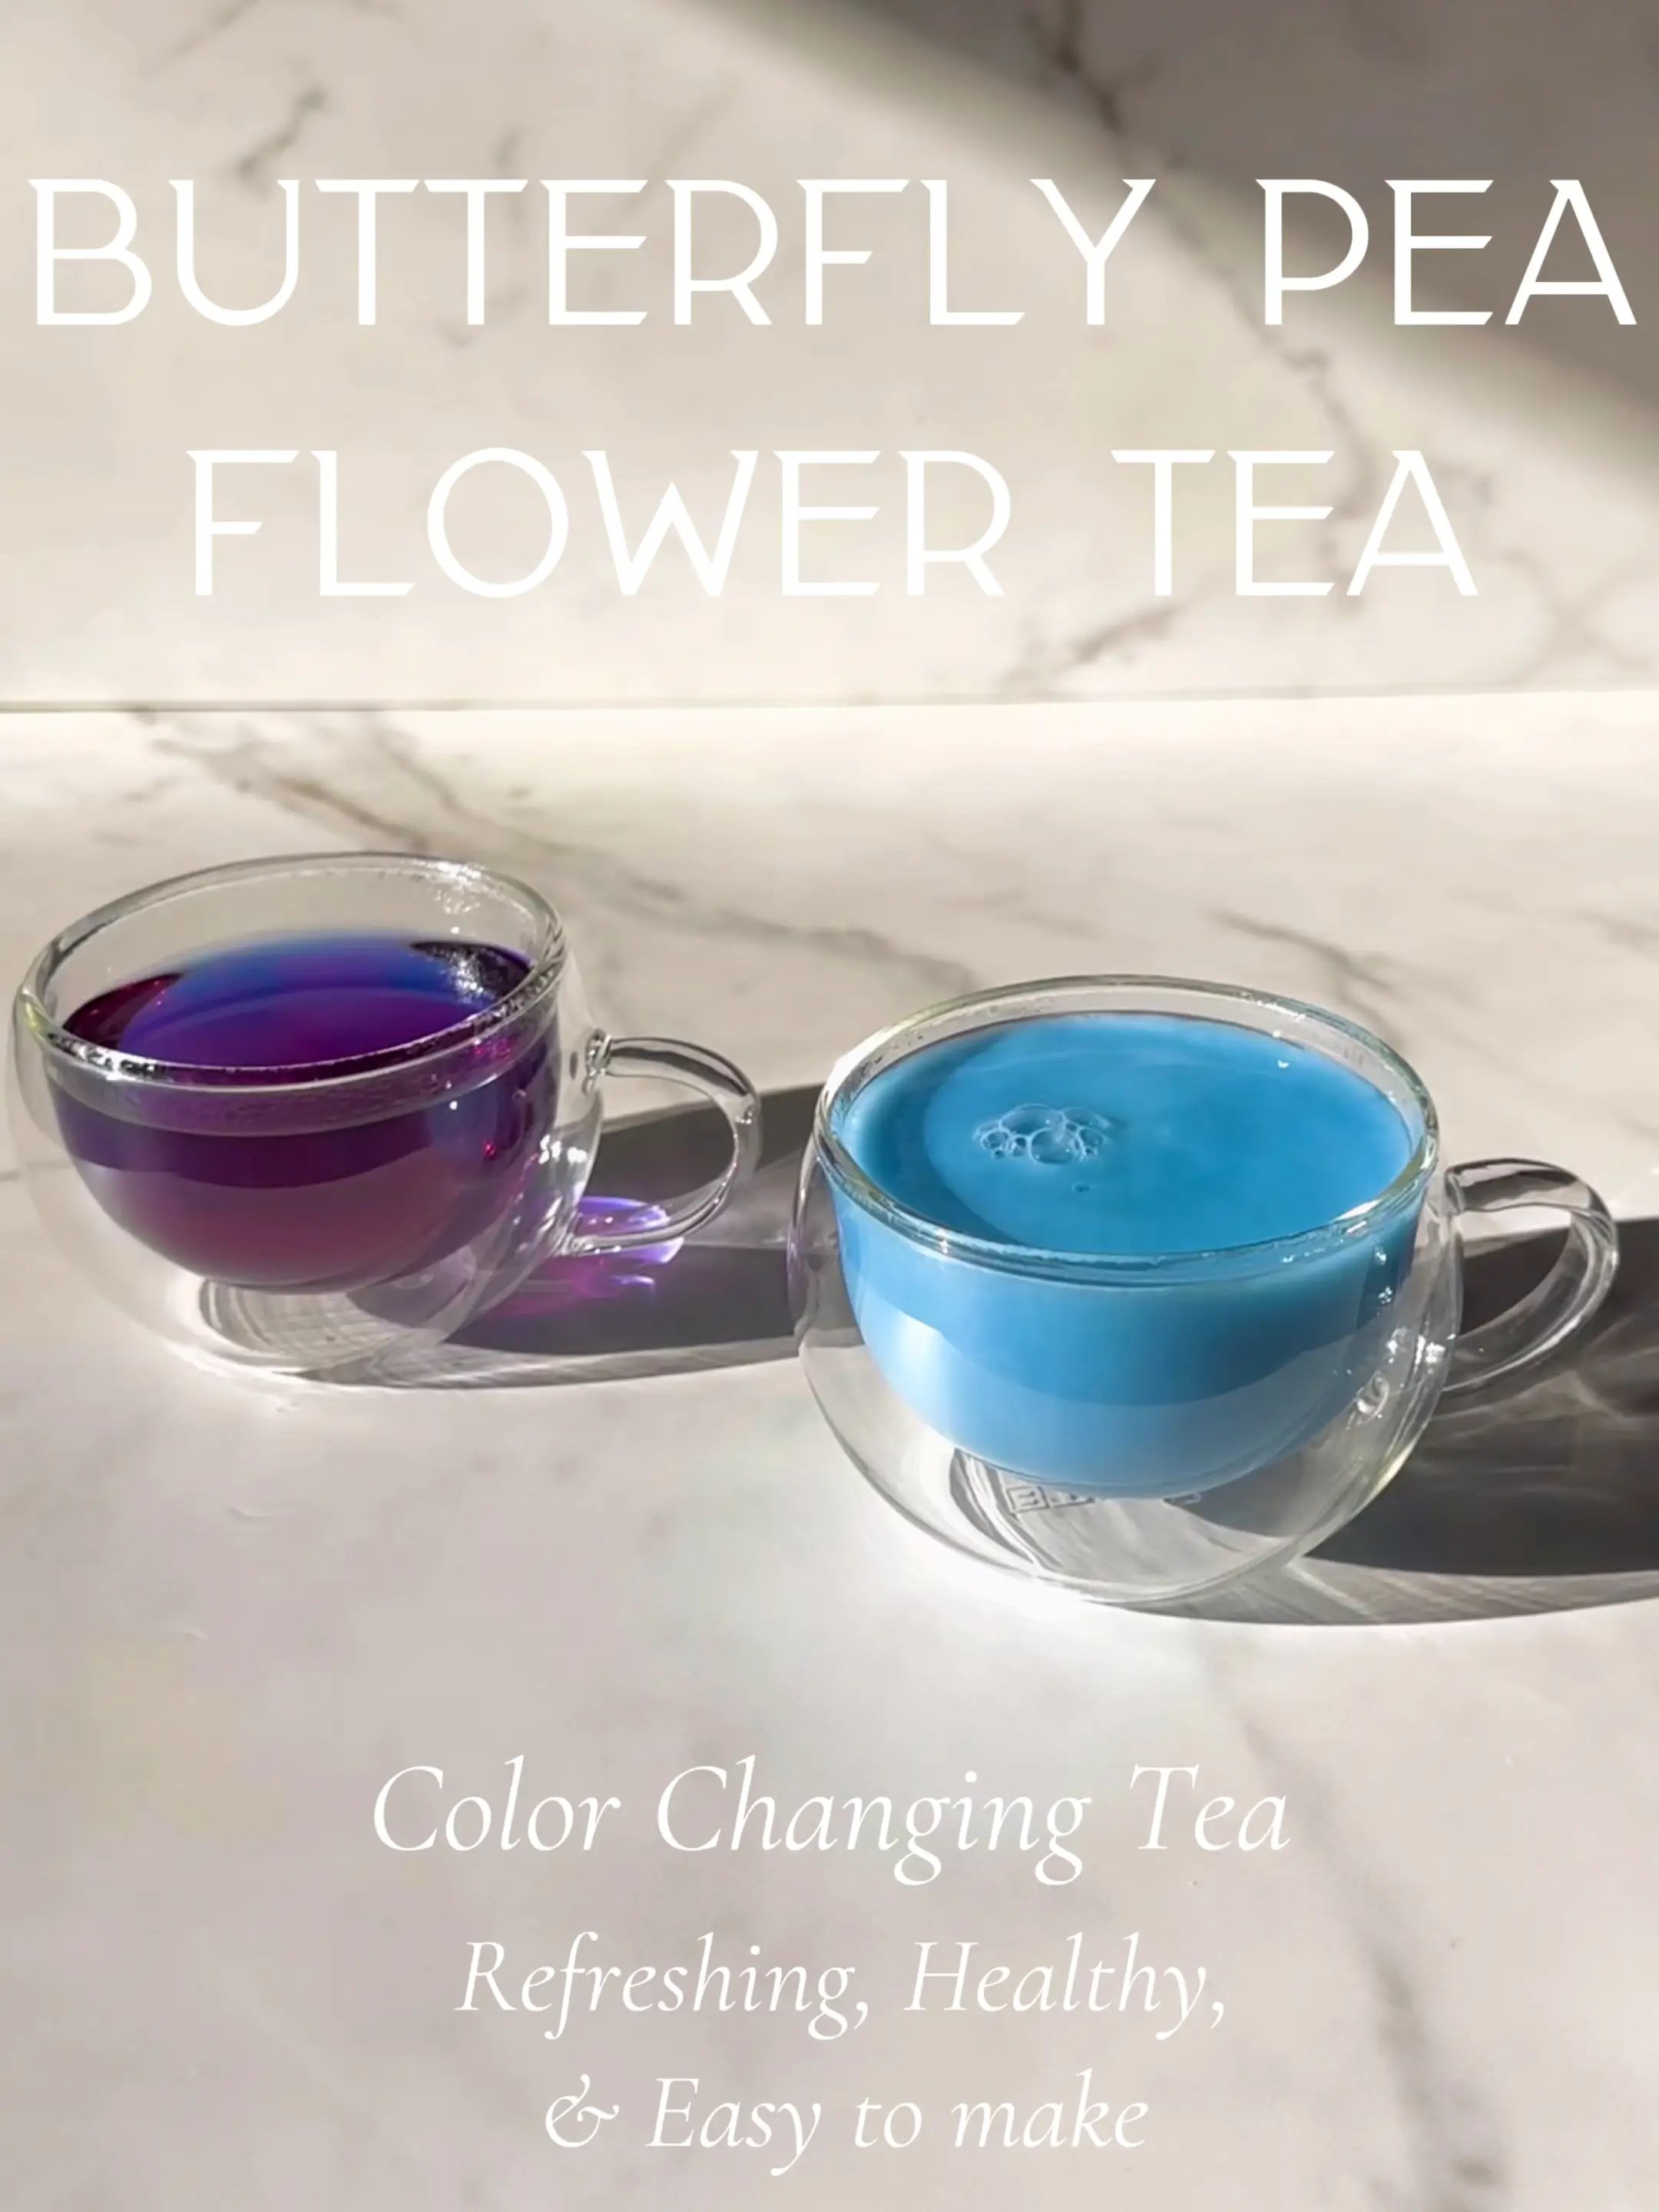 How To Make Butterfly Pea Flower Tea | Article Posted By Espressoyourslf |  Lemon8